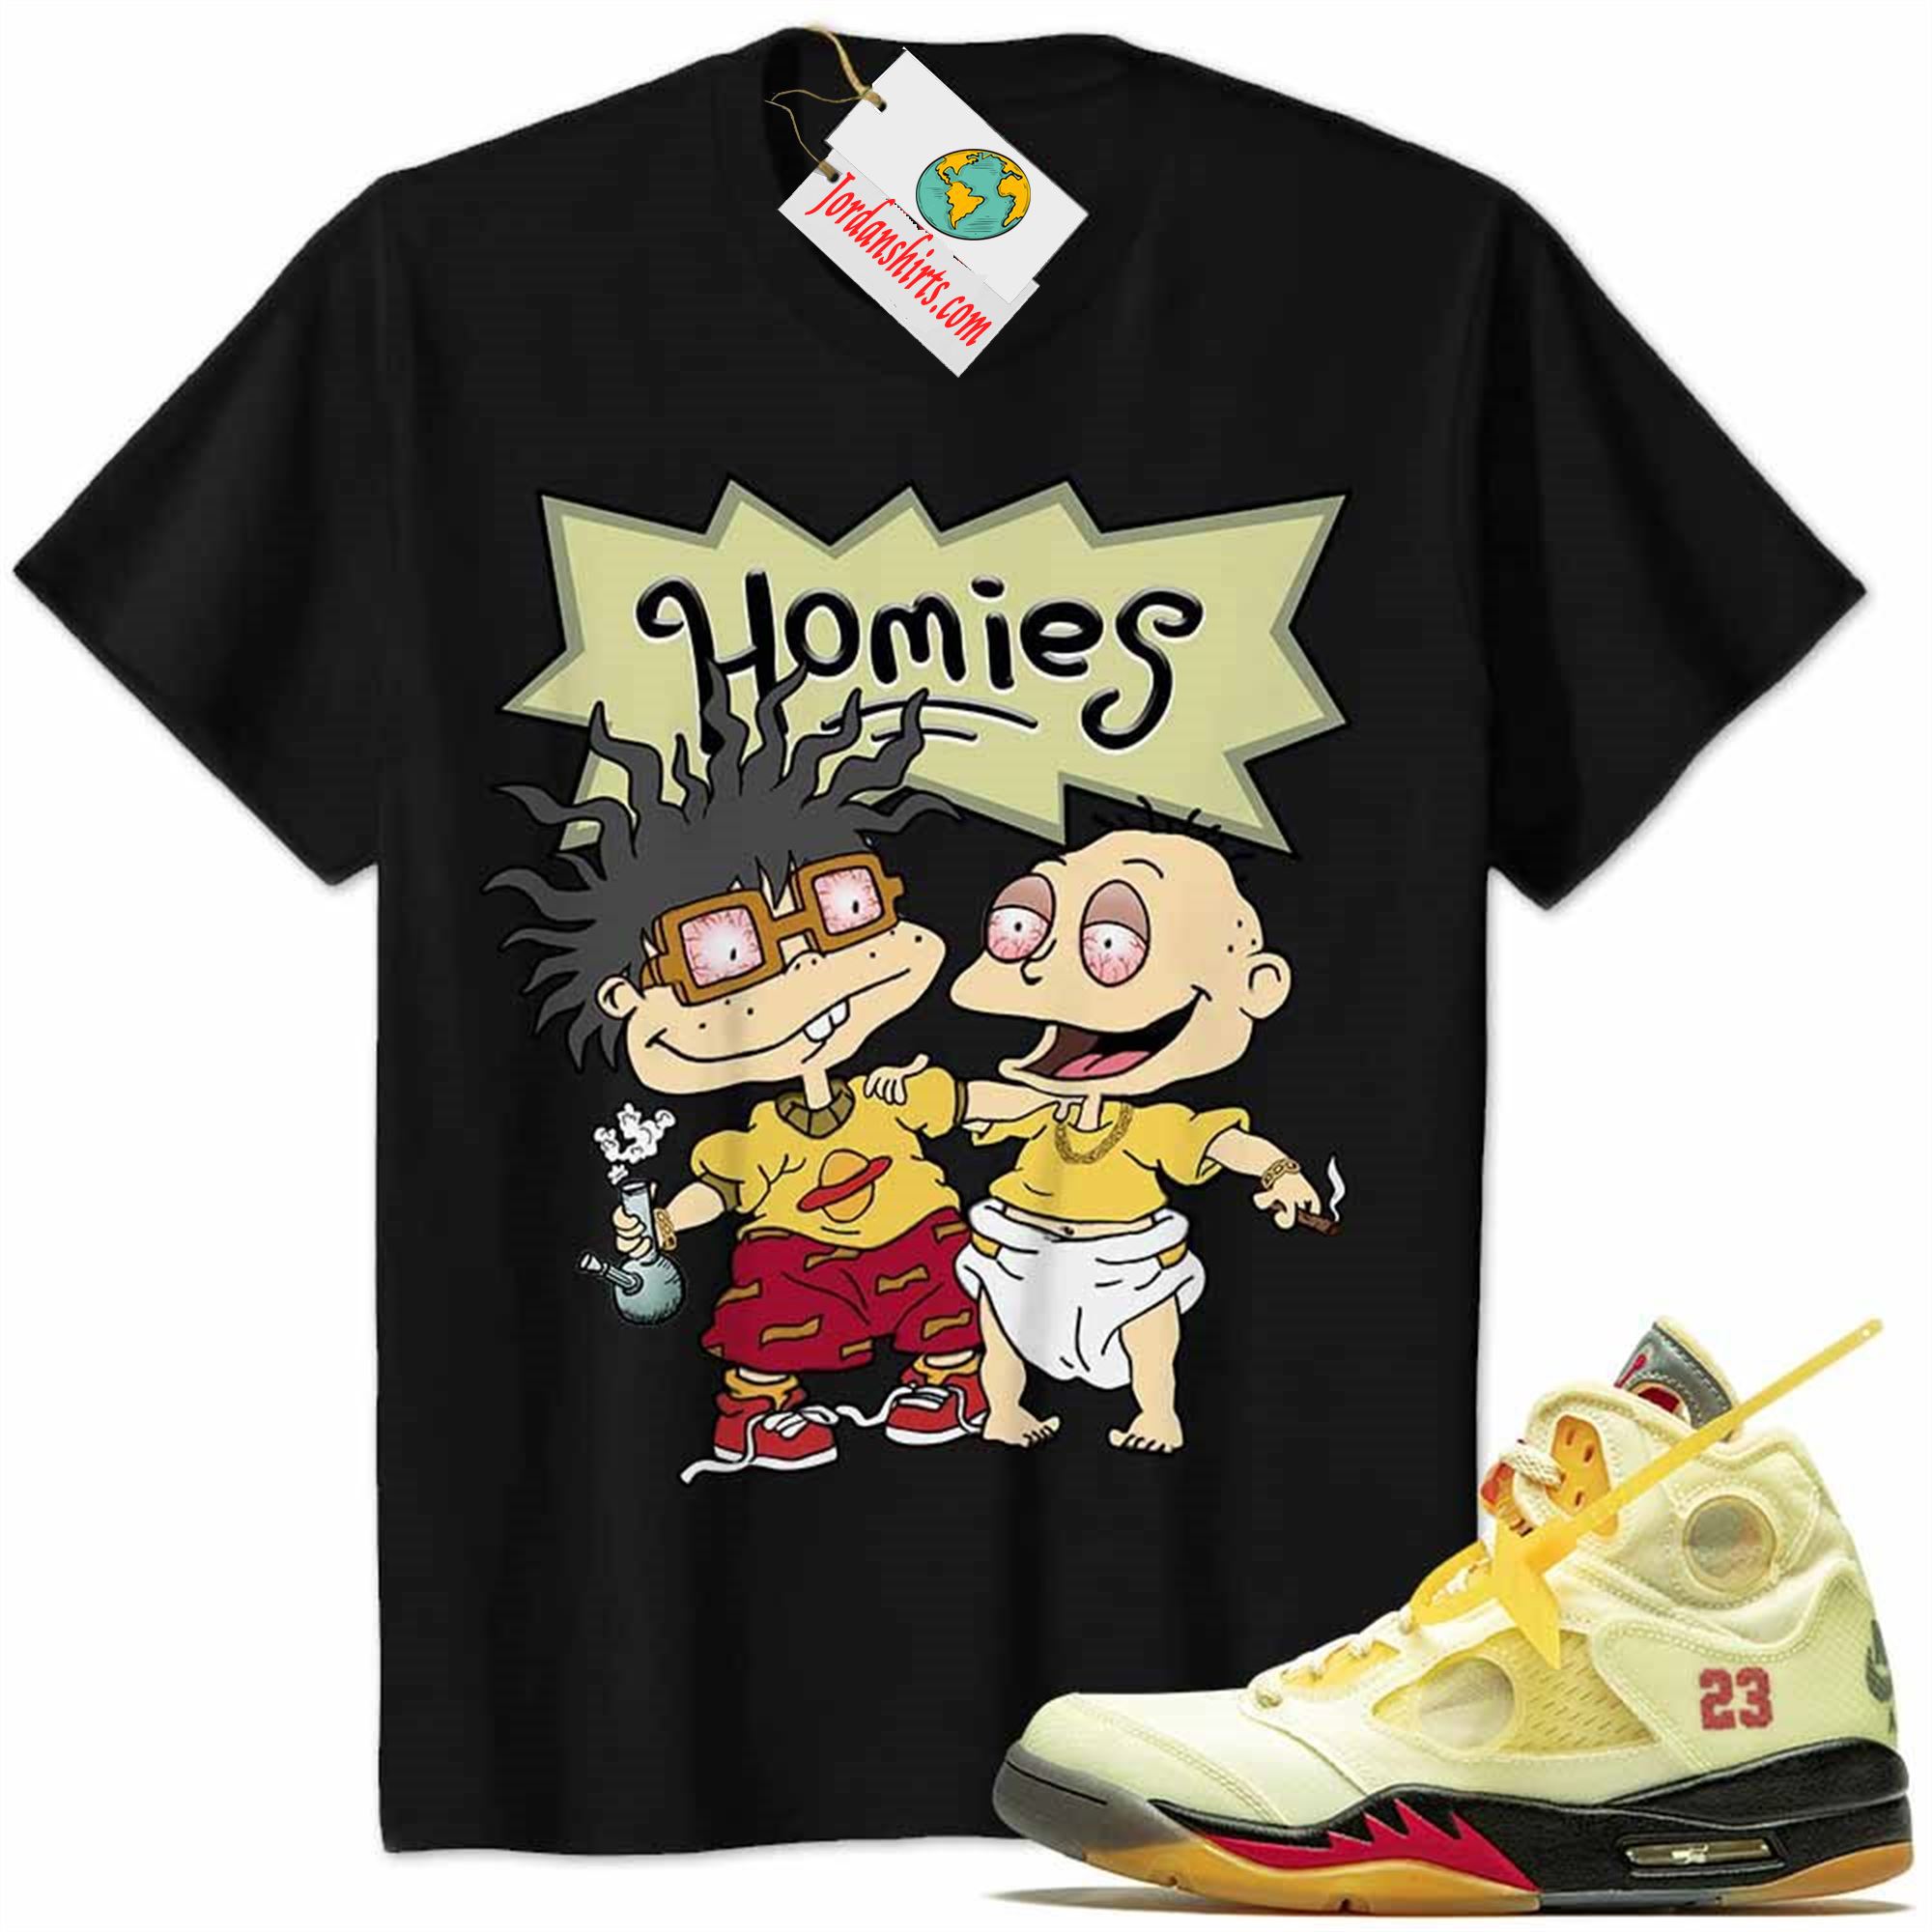 Jordan 5 Shirt, Off-white Shirt Hommies Tommy Pickles Chuckie Finster Rugrats Black Full Size Up To 5xl